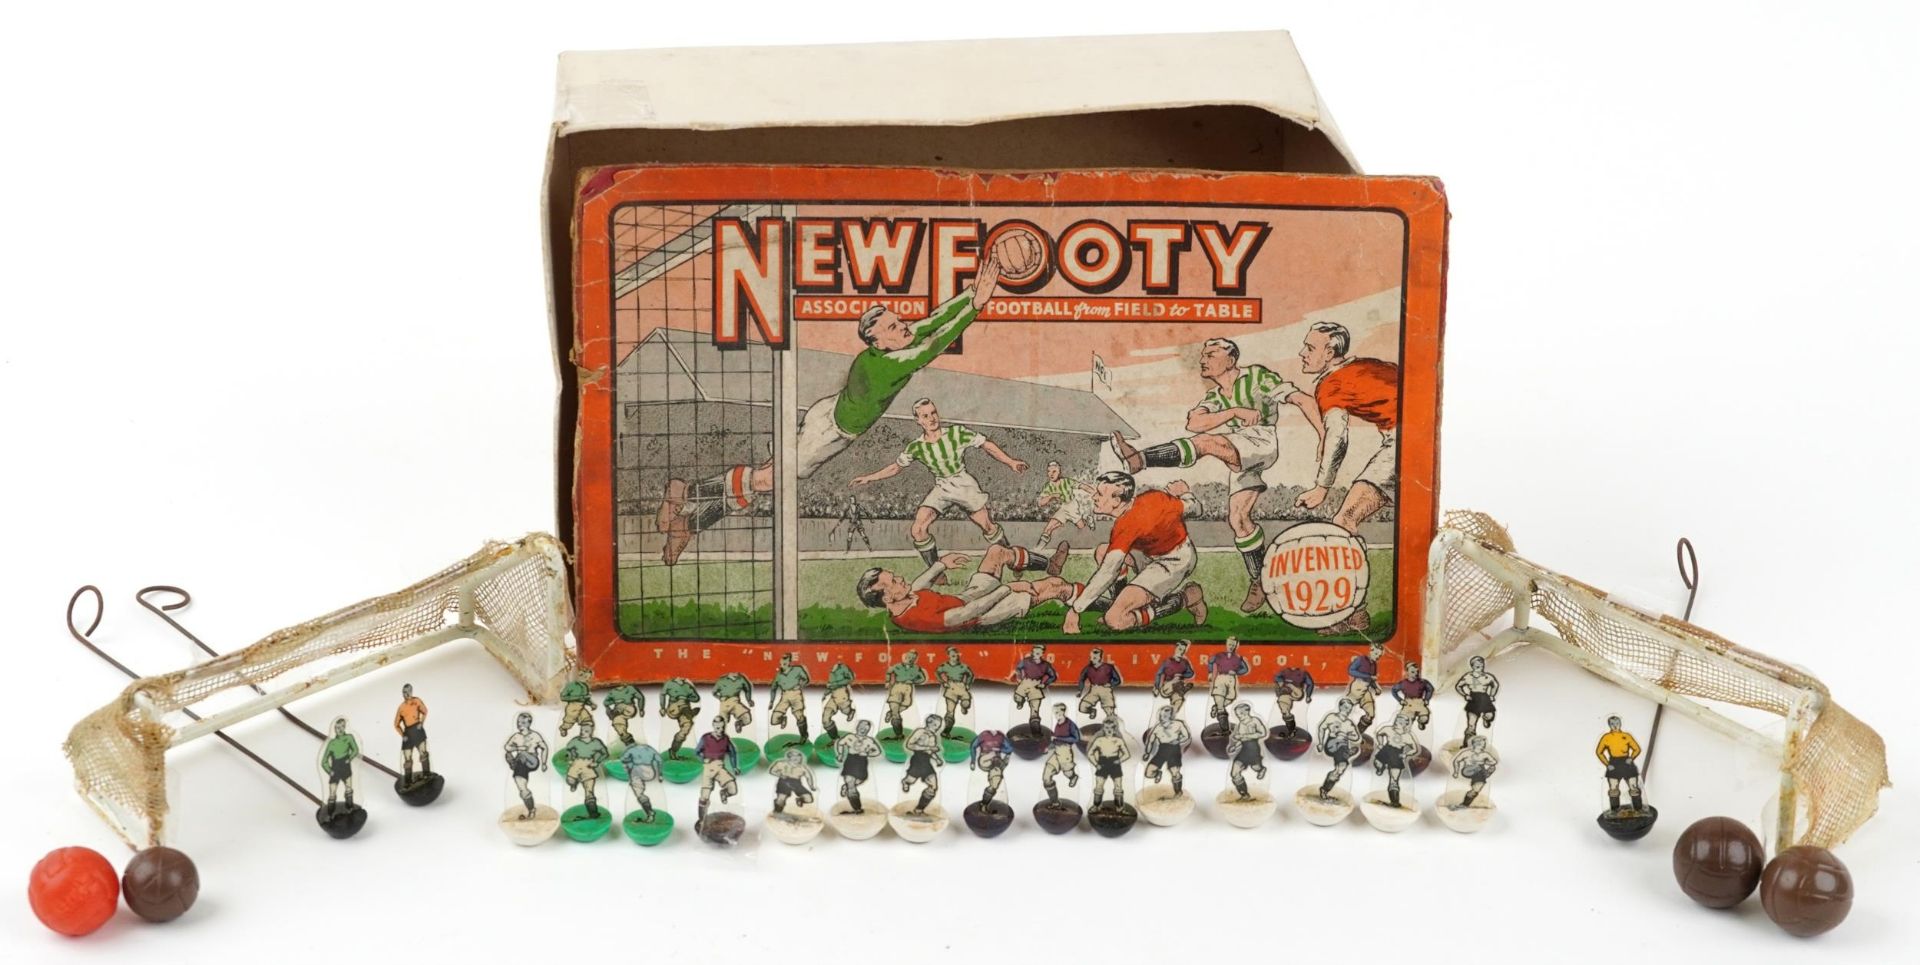 Early 20th century New Footy table soccer game with box and grass by The New Footy Co Liverpool : - Image 2 of 7